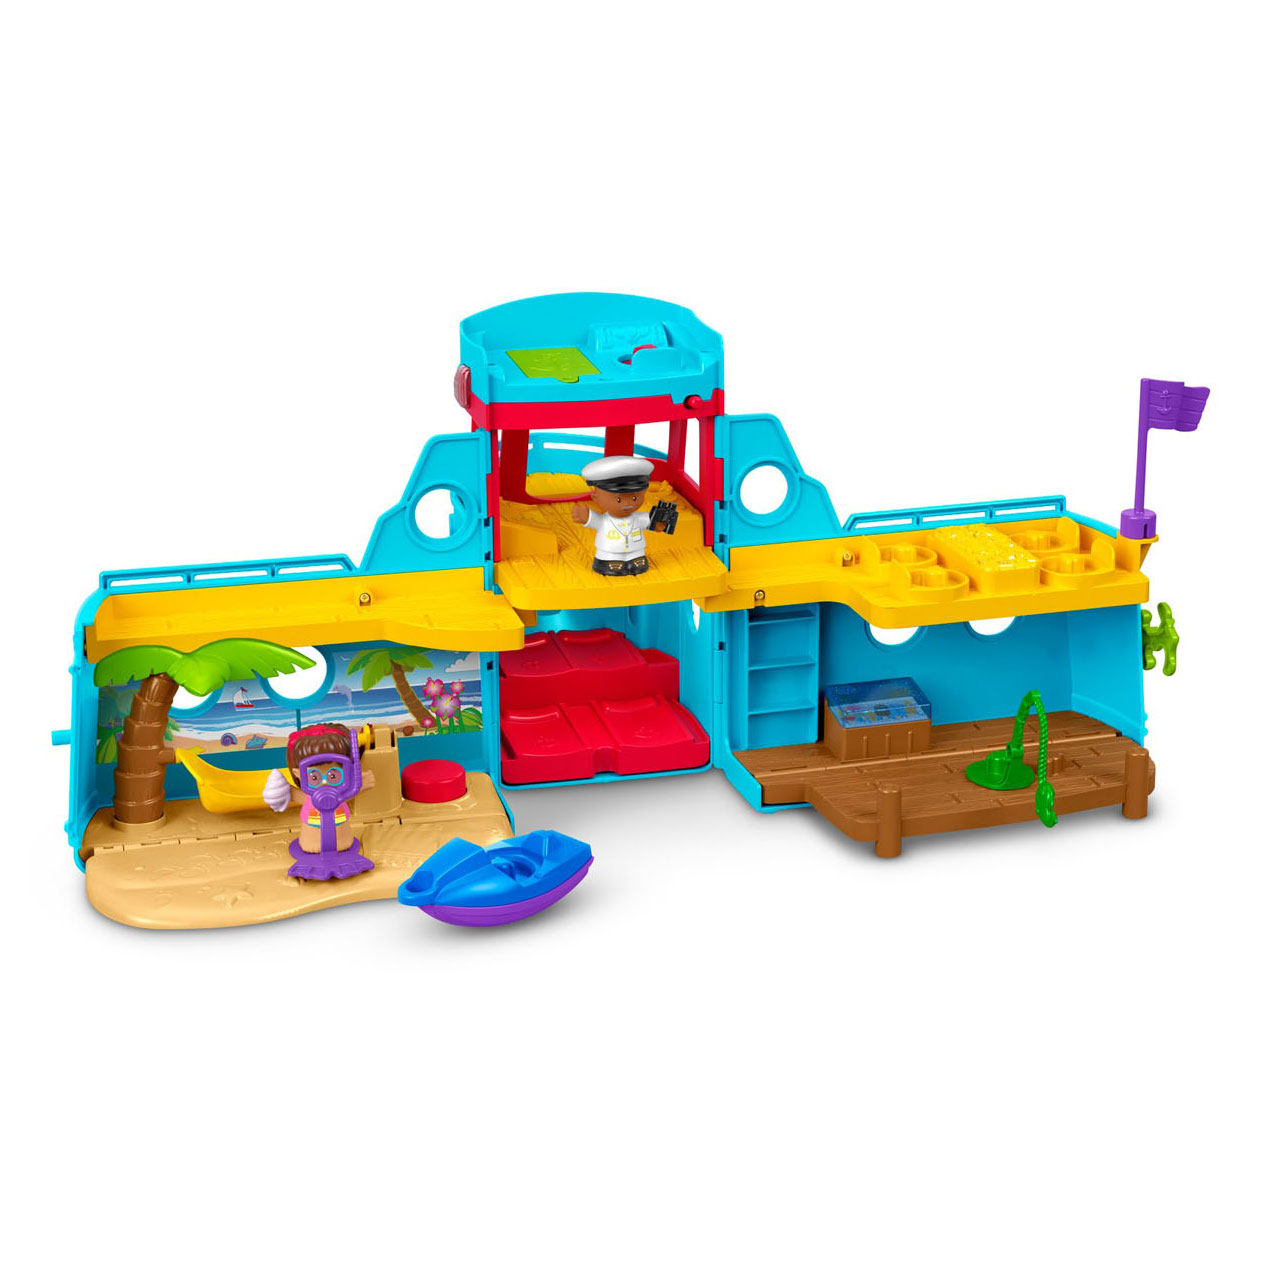 Fisher Price Little People Schip